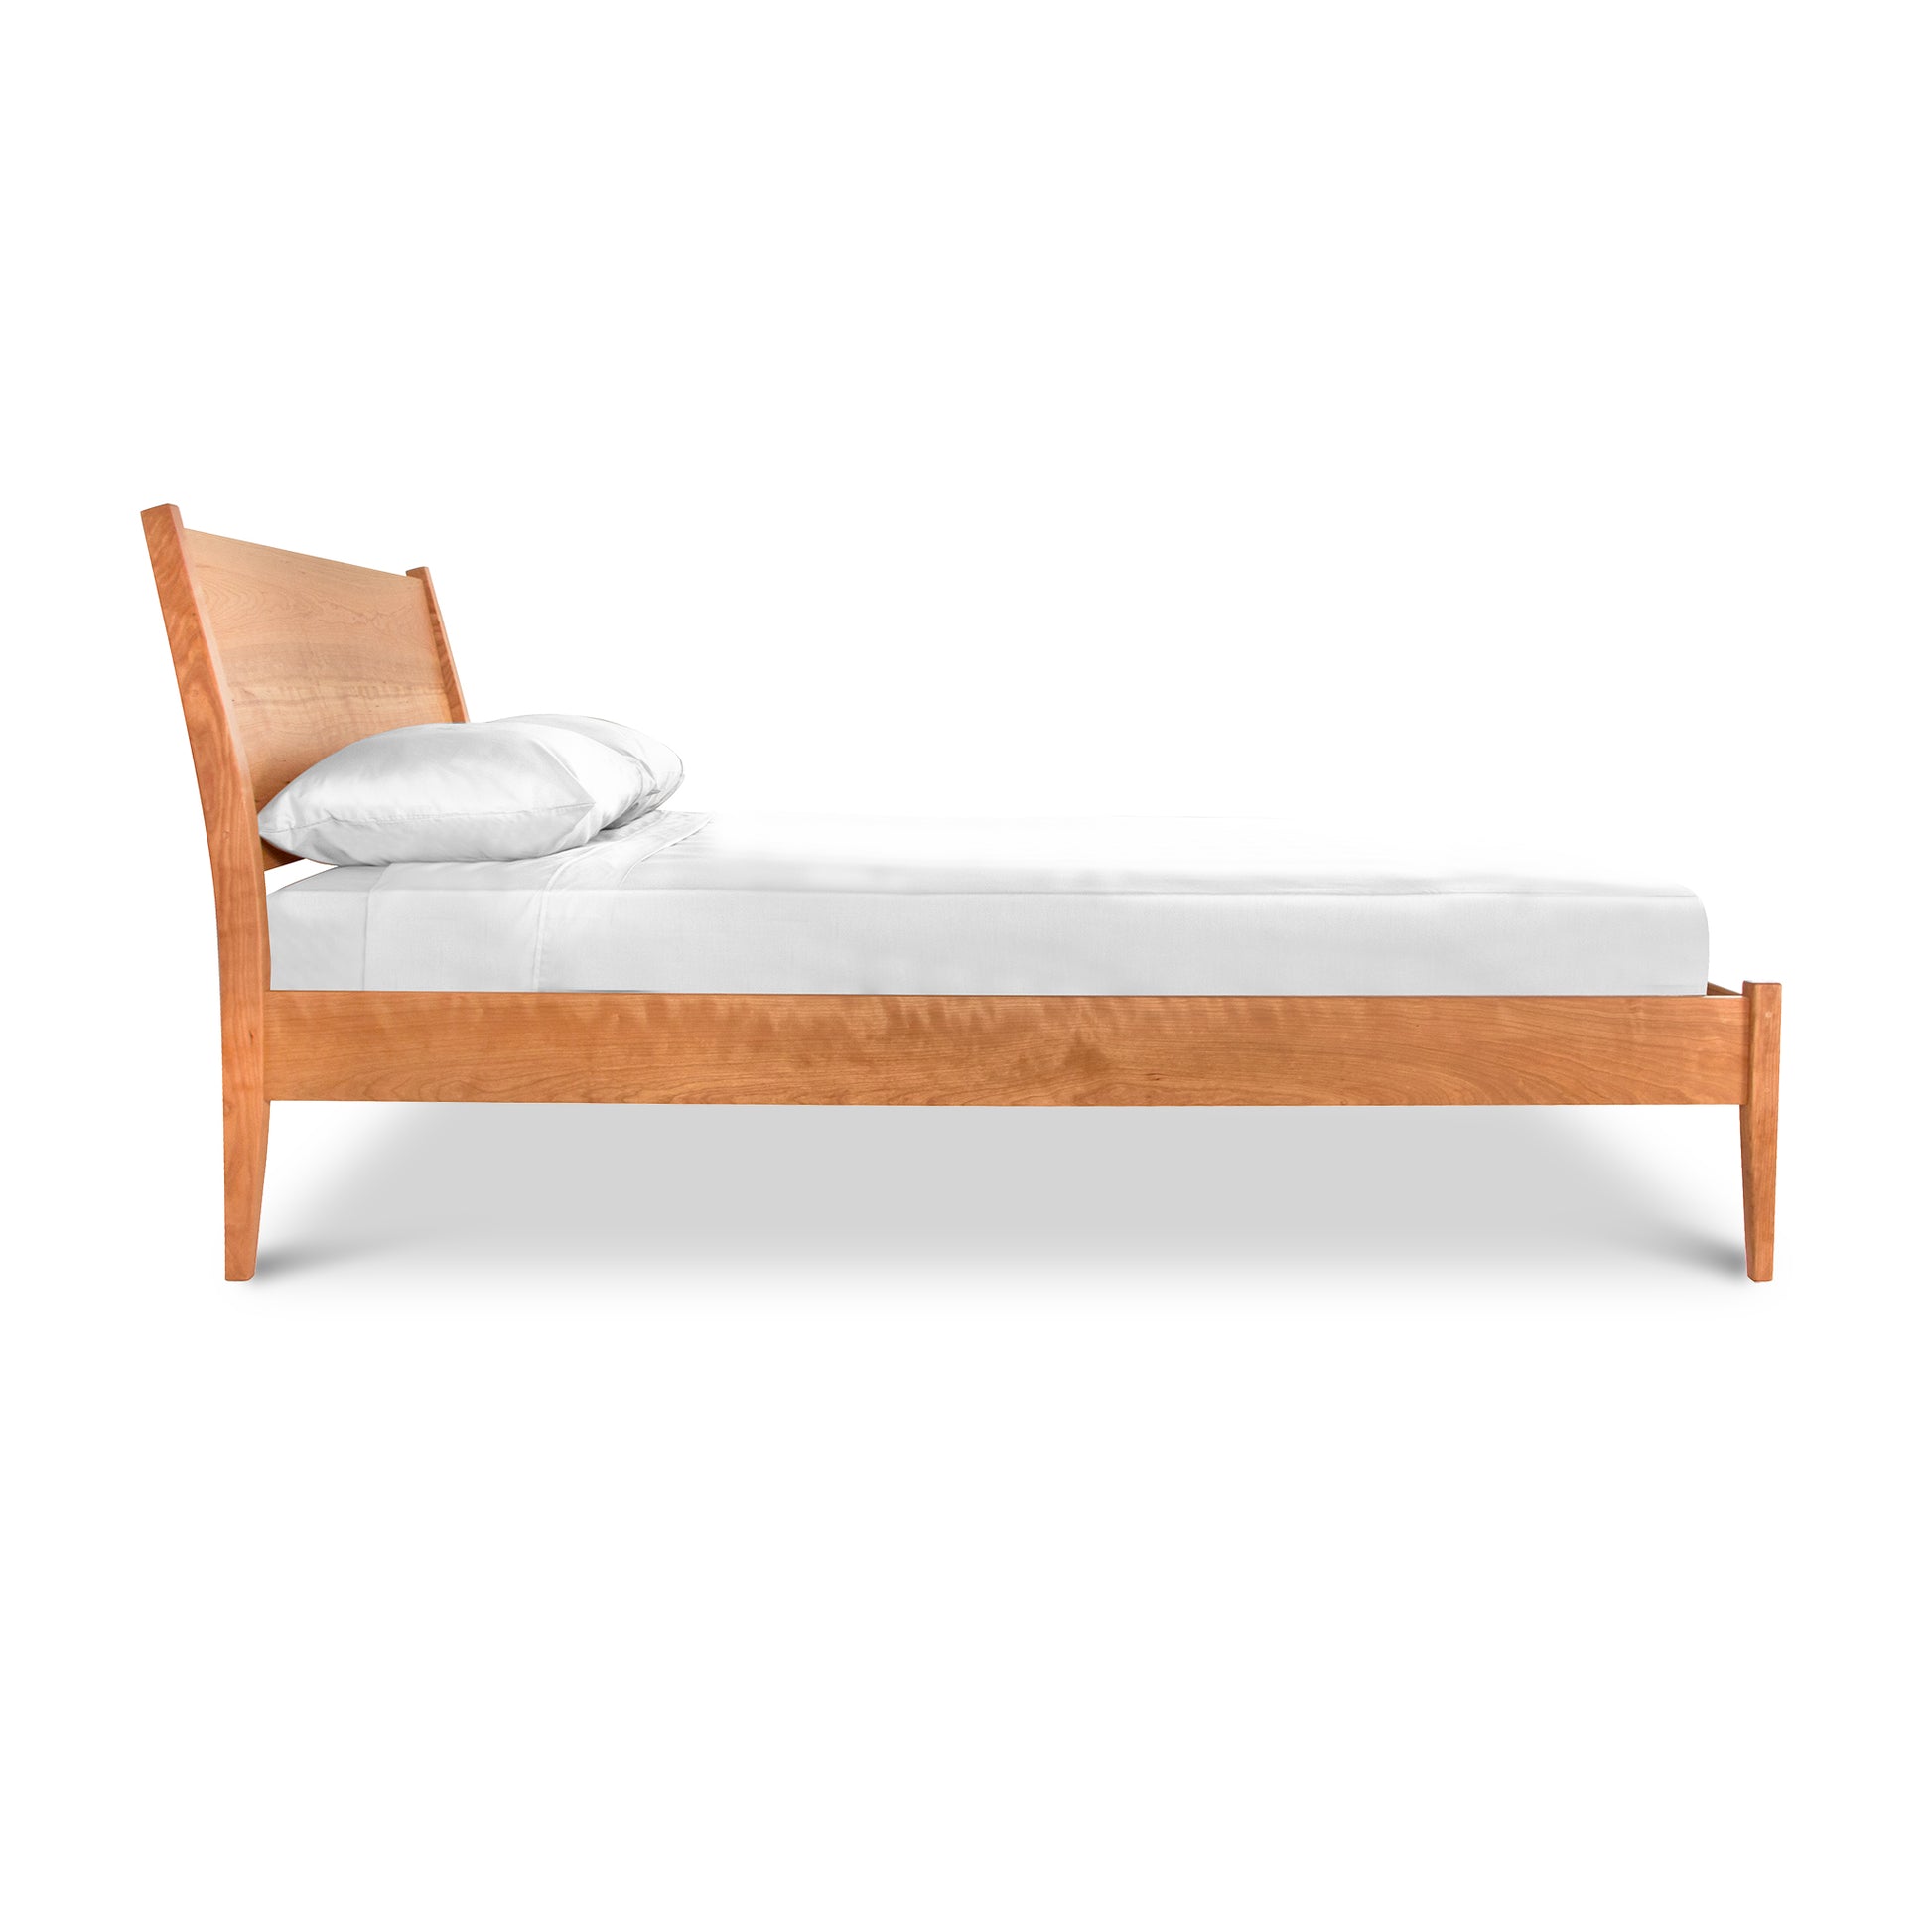 A Maple Corner Woodworks Andover Modern Incline Bed with a slanted headboard and a single white pillow on a white mattress, isolated against a white background.